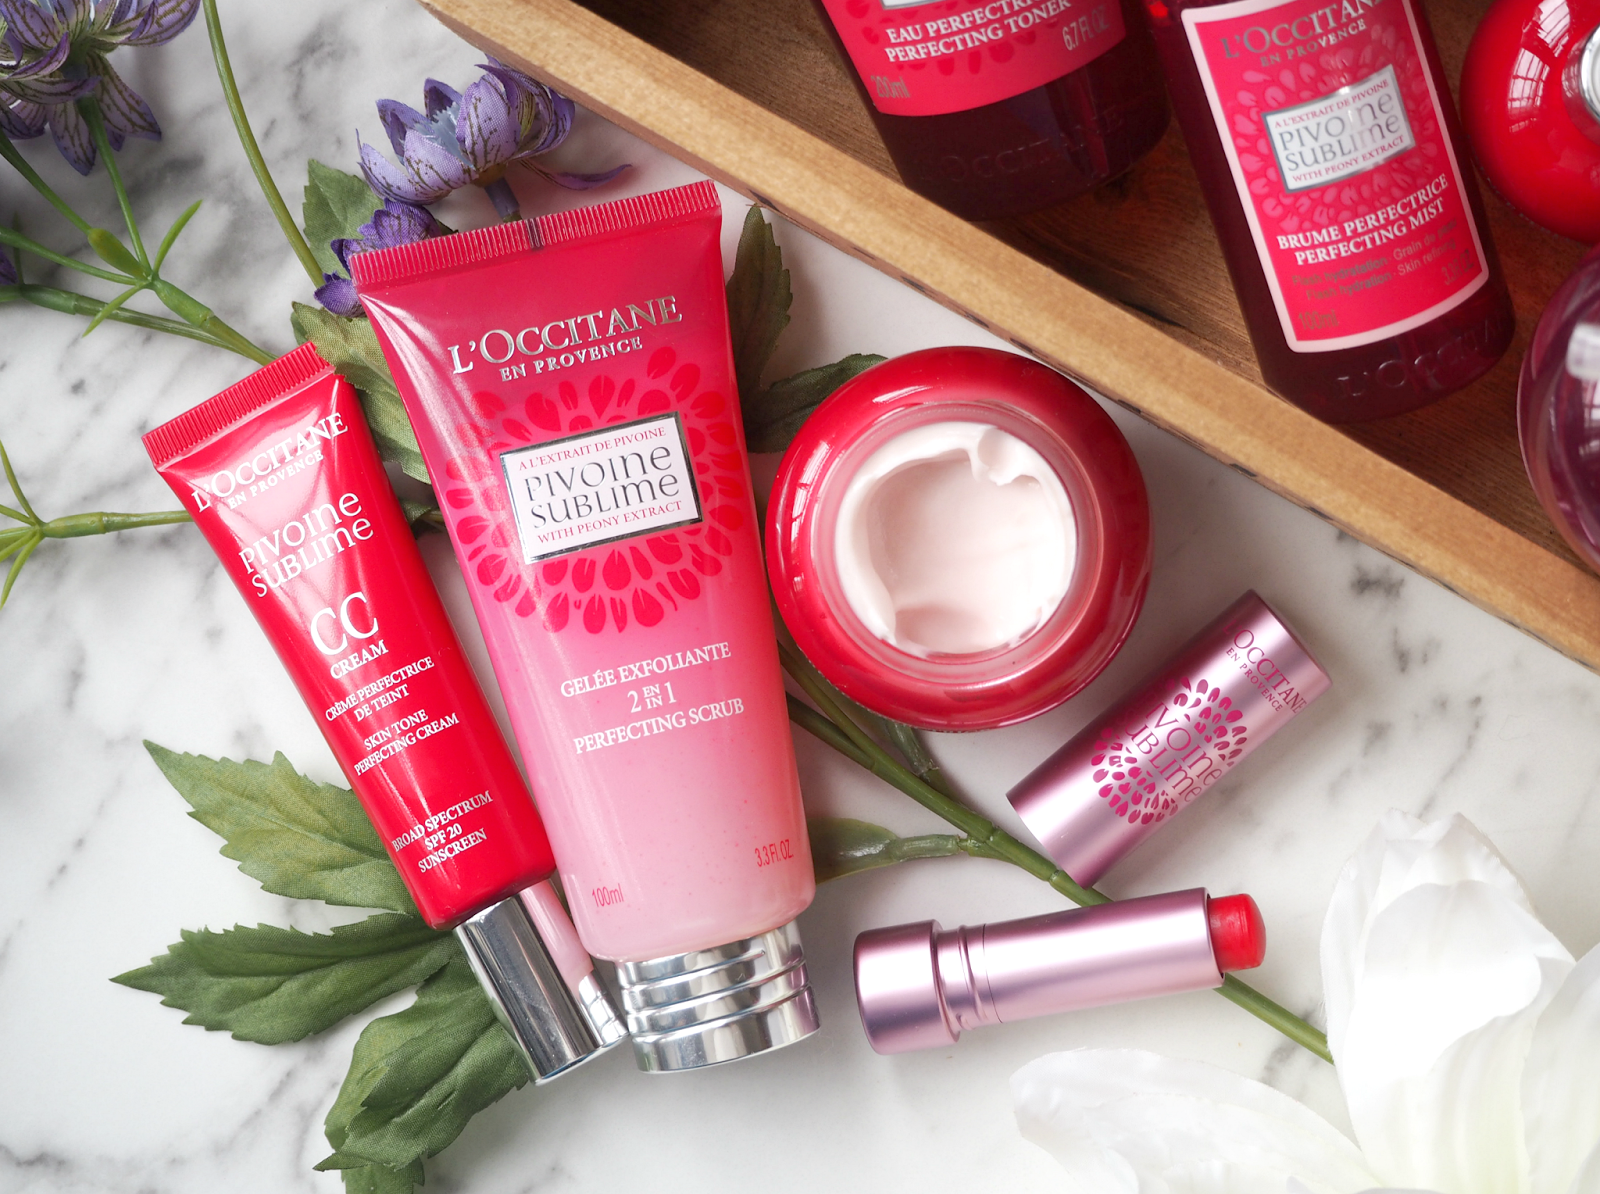 Beautiful Skincare Solutions For Every Age: L'Occitane Peony Enriched 'Pivone Sublime' (PLUS WIN THE ENTIRE COLLECTION)